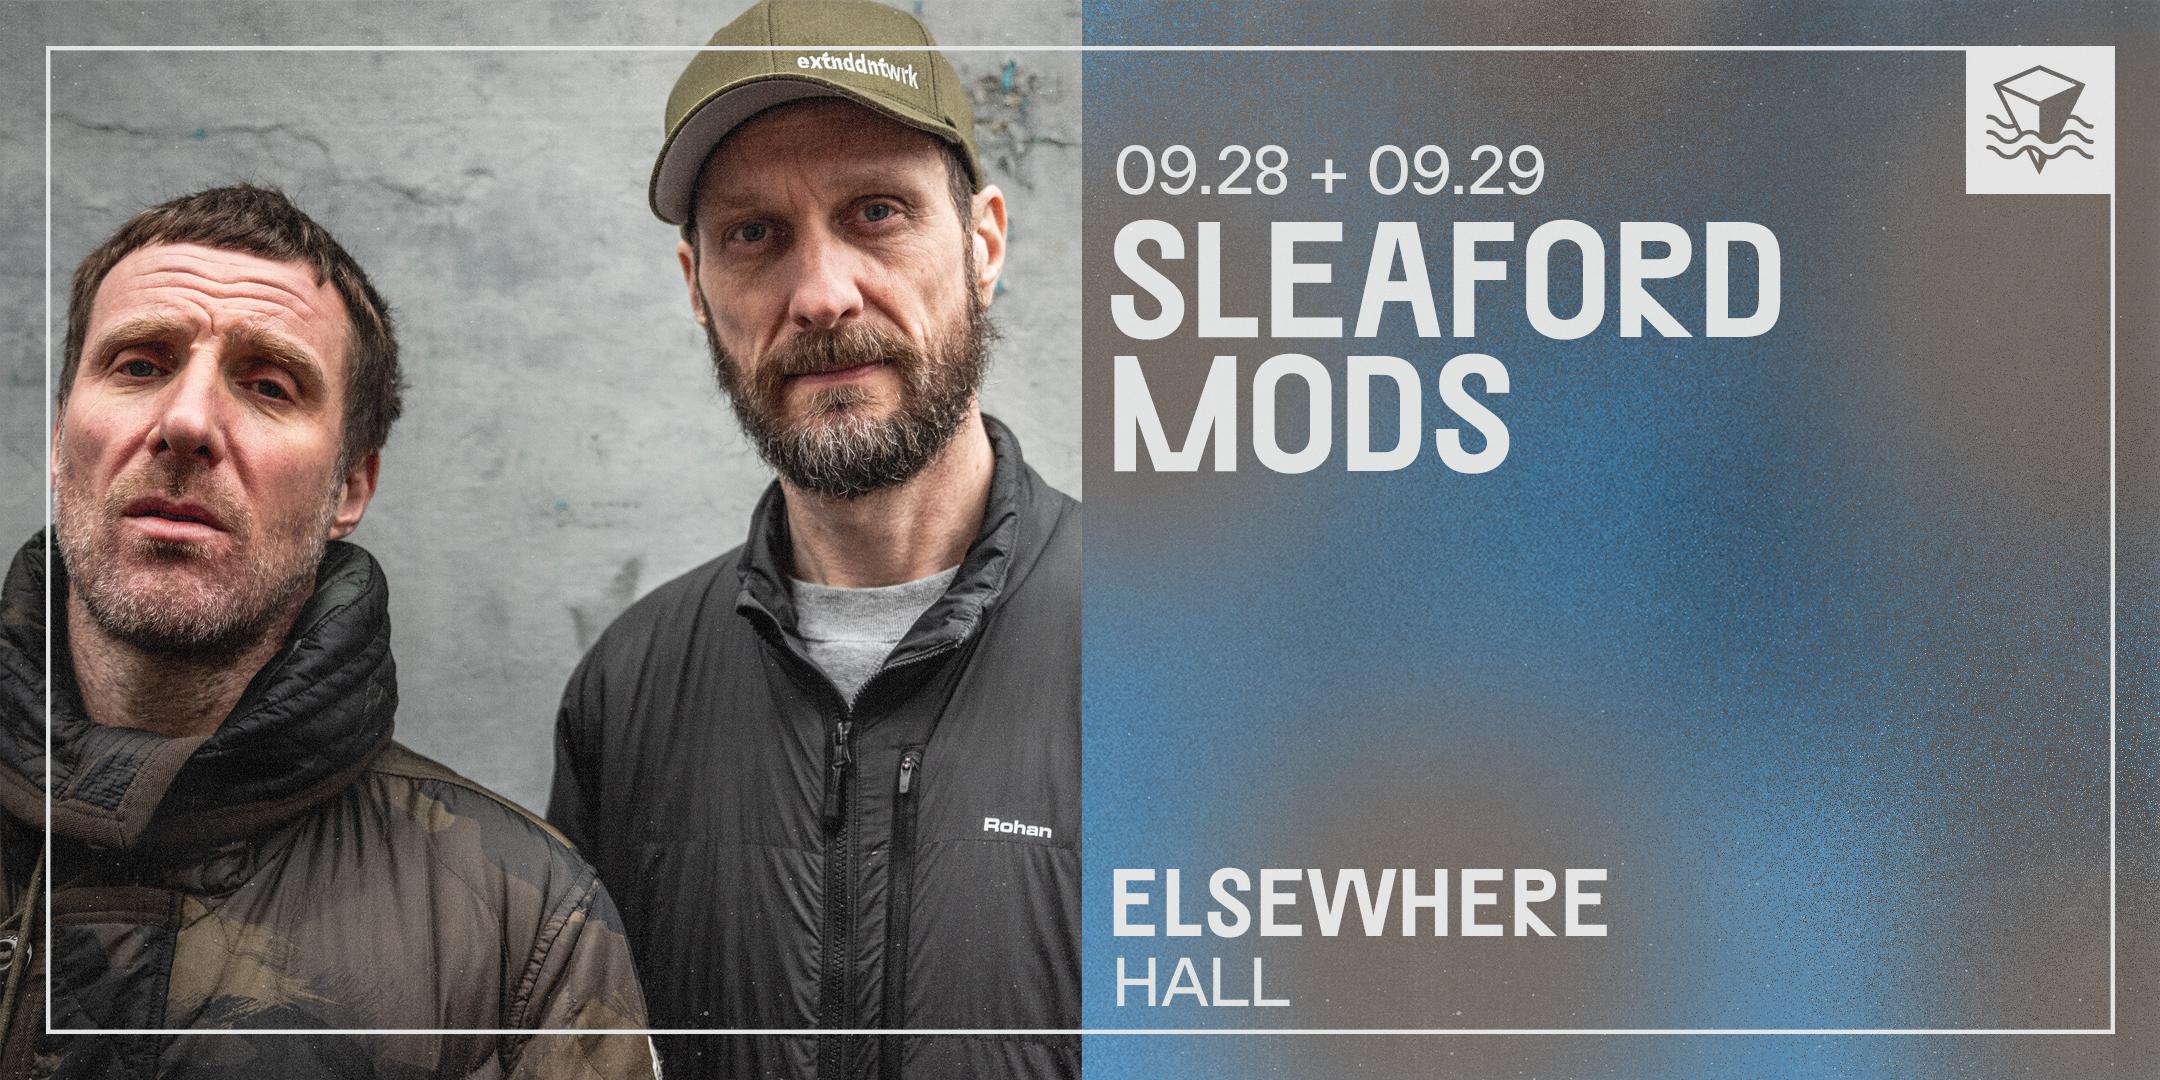 CANCELLED Sleaford Mods @ Elsewhere (Hall)